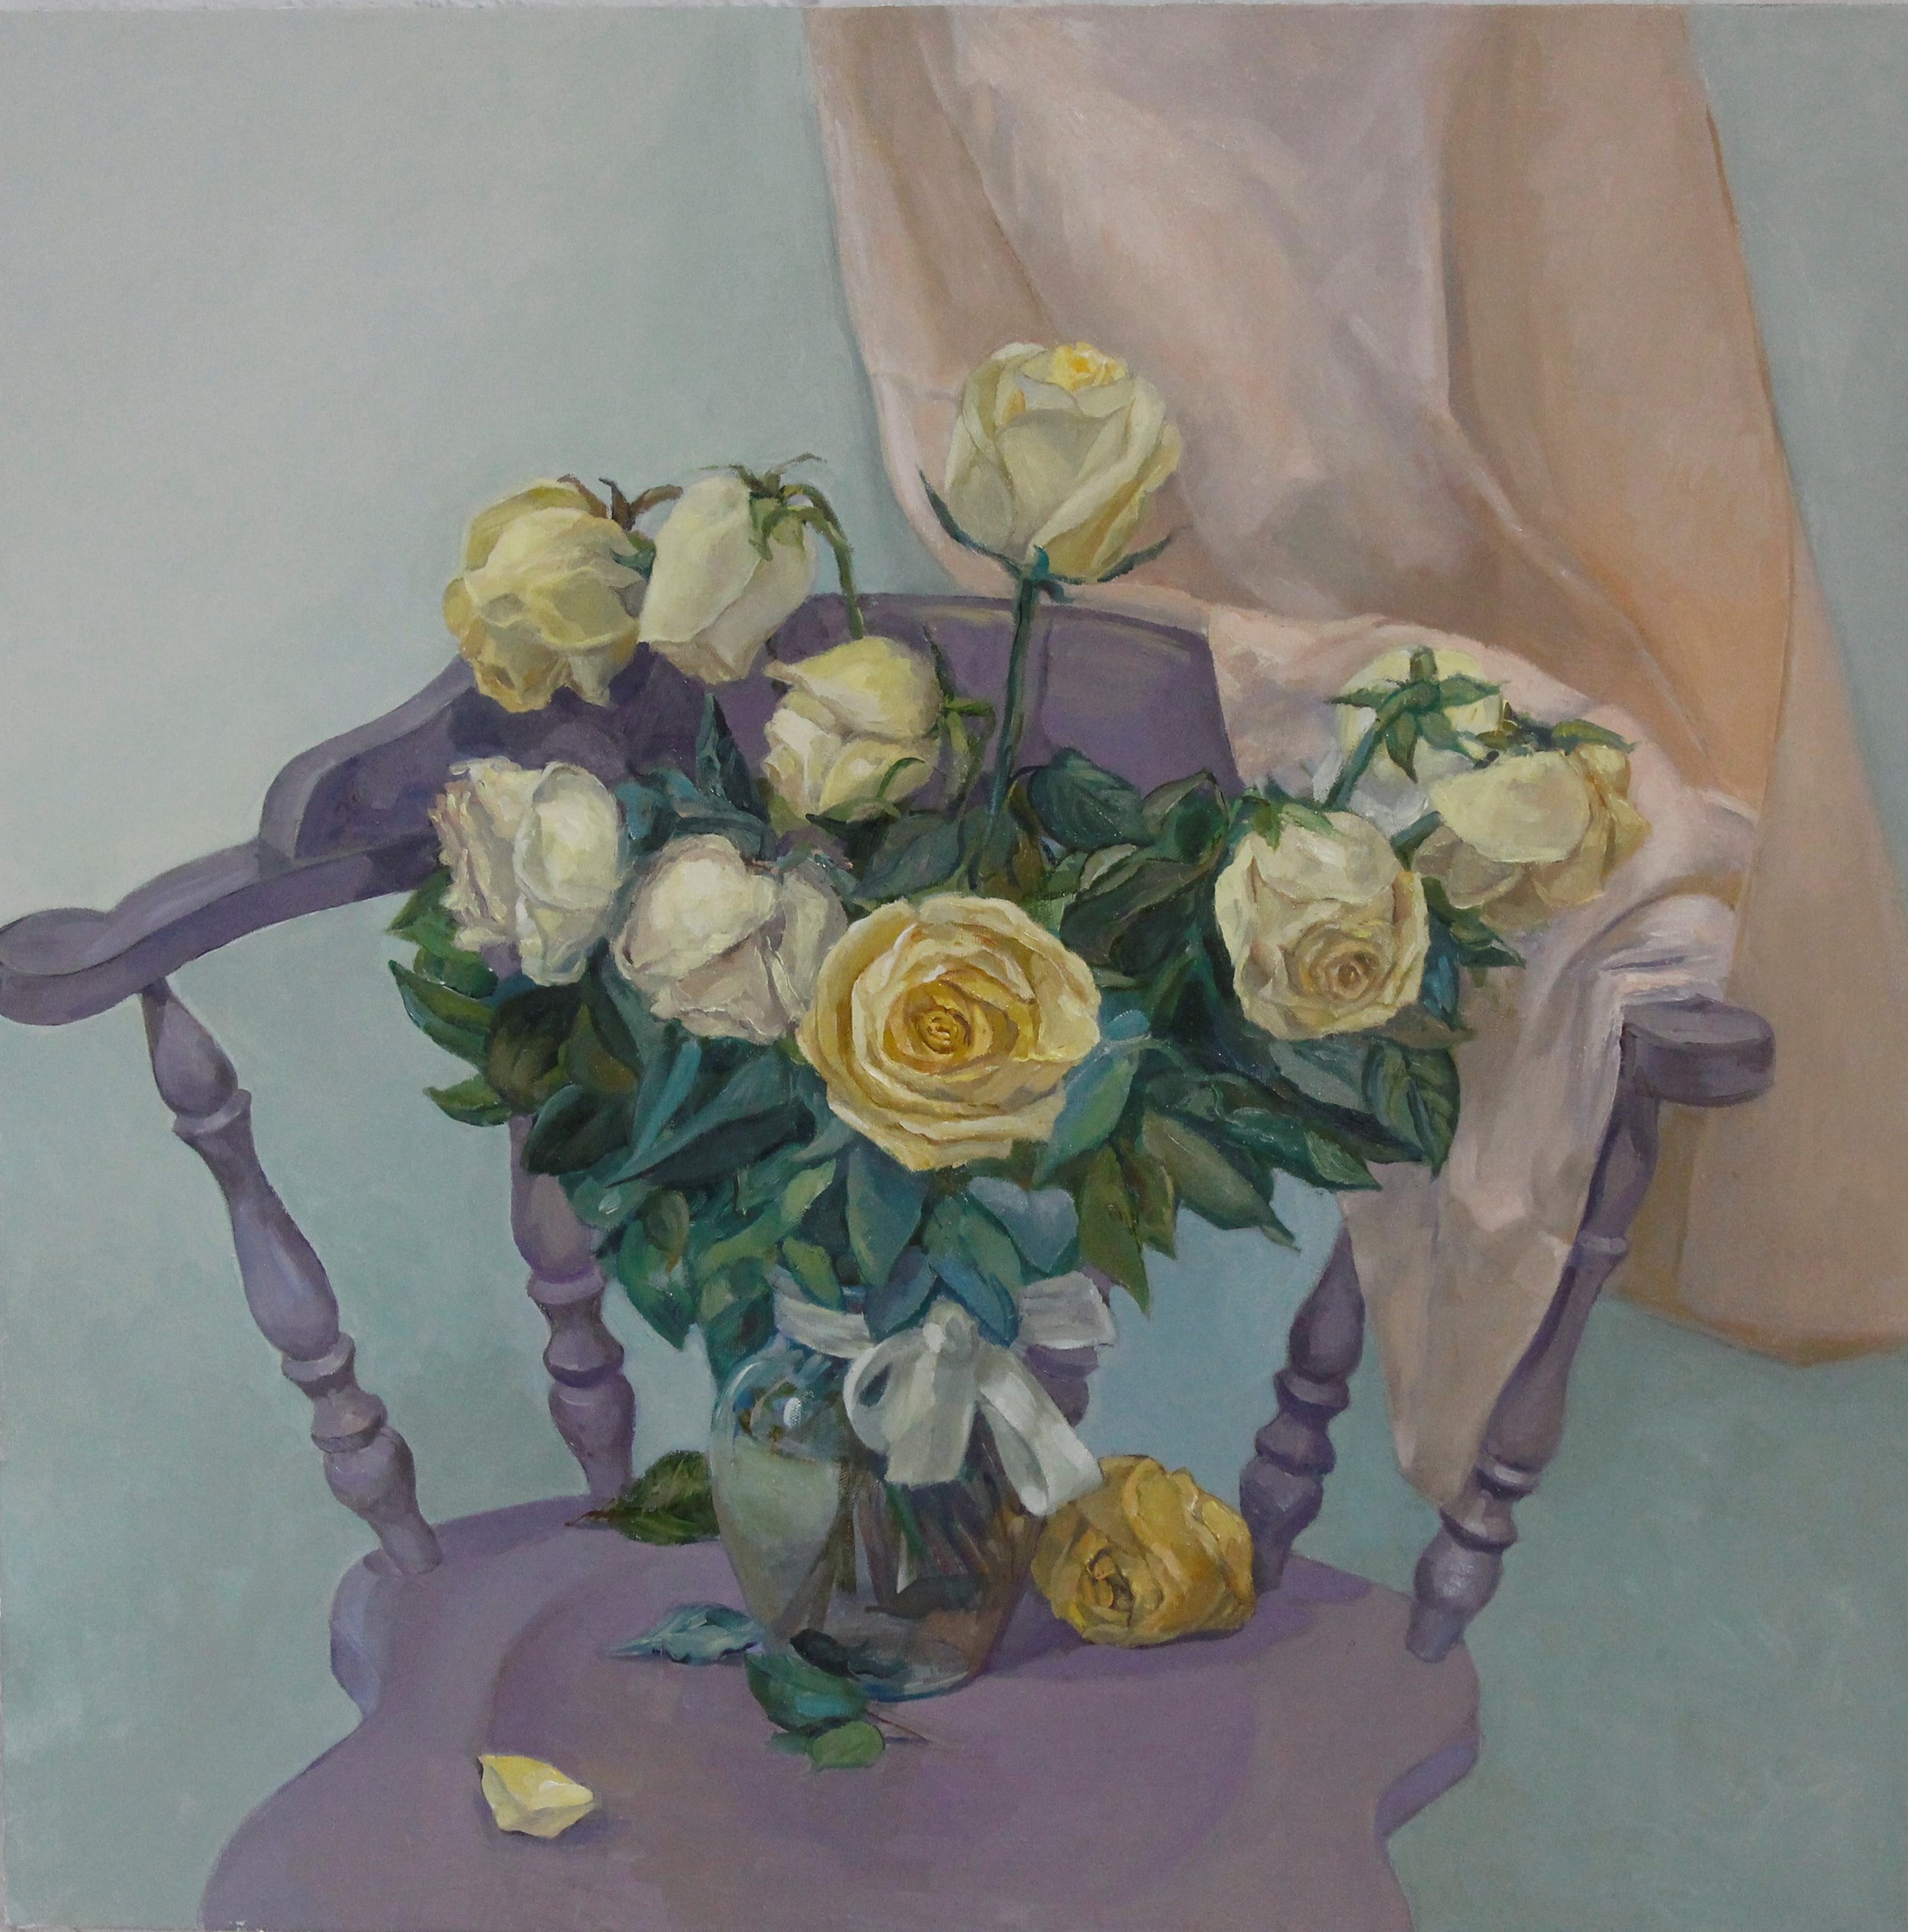 Alexandra's chair, 2021, Oil on linen, 30x30 inches.